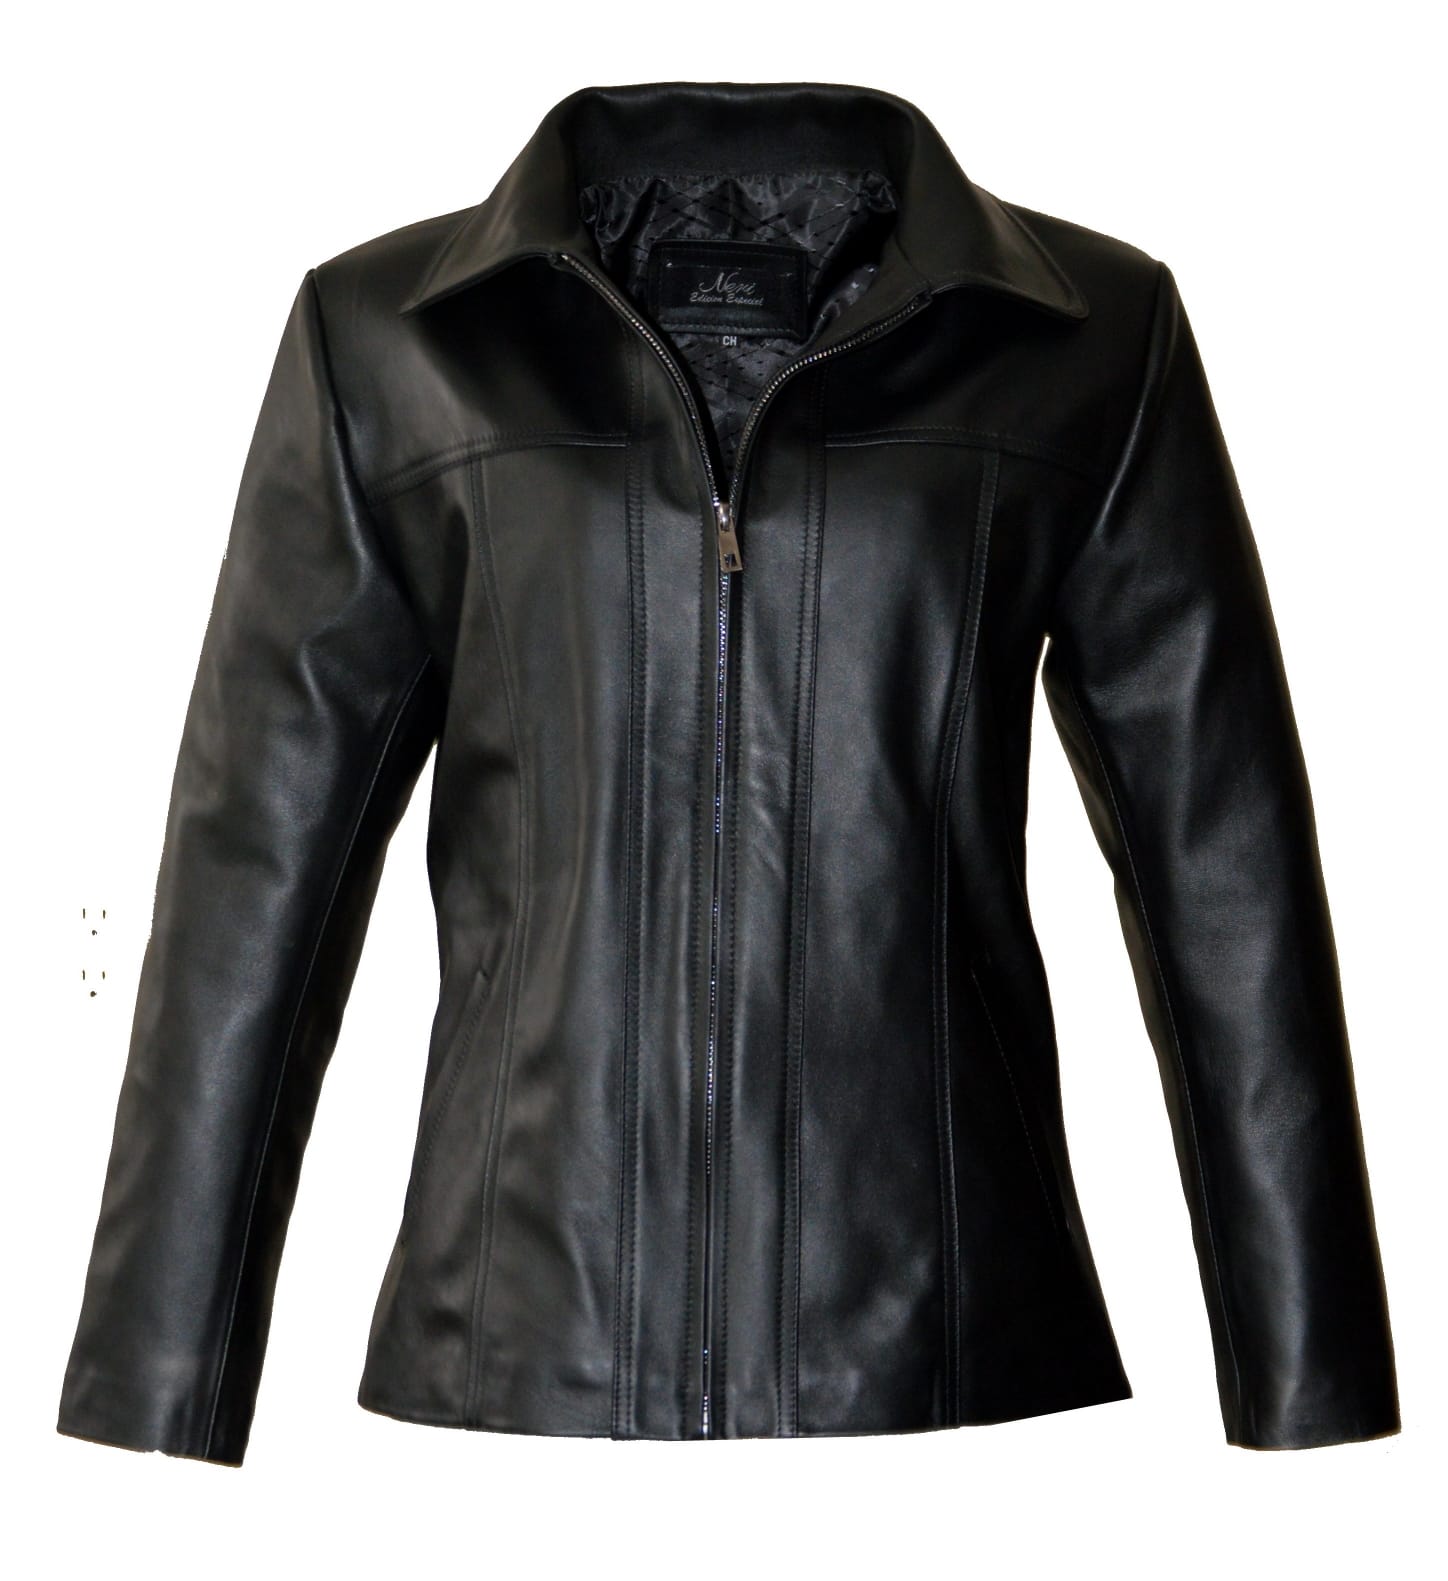 Chamarra piel mujer negra mod. lev III – Chamarras Piel Leather outfit